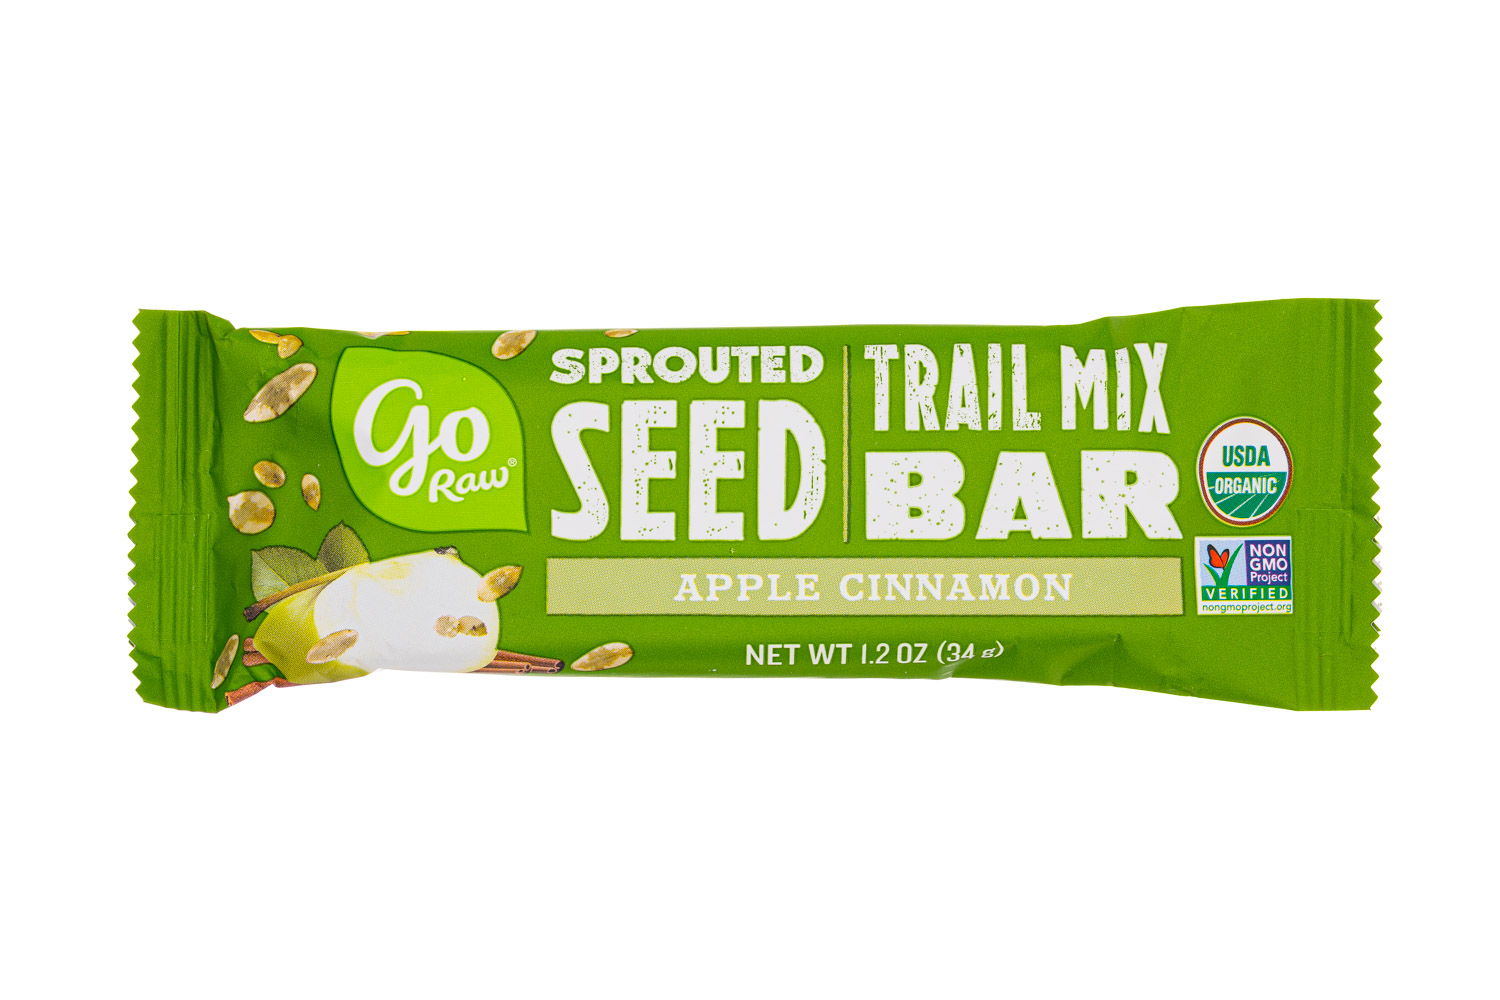 Sprouted Seed Trail Mix Bar - Apple Cinnamon